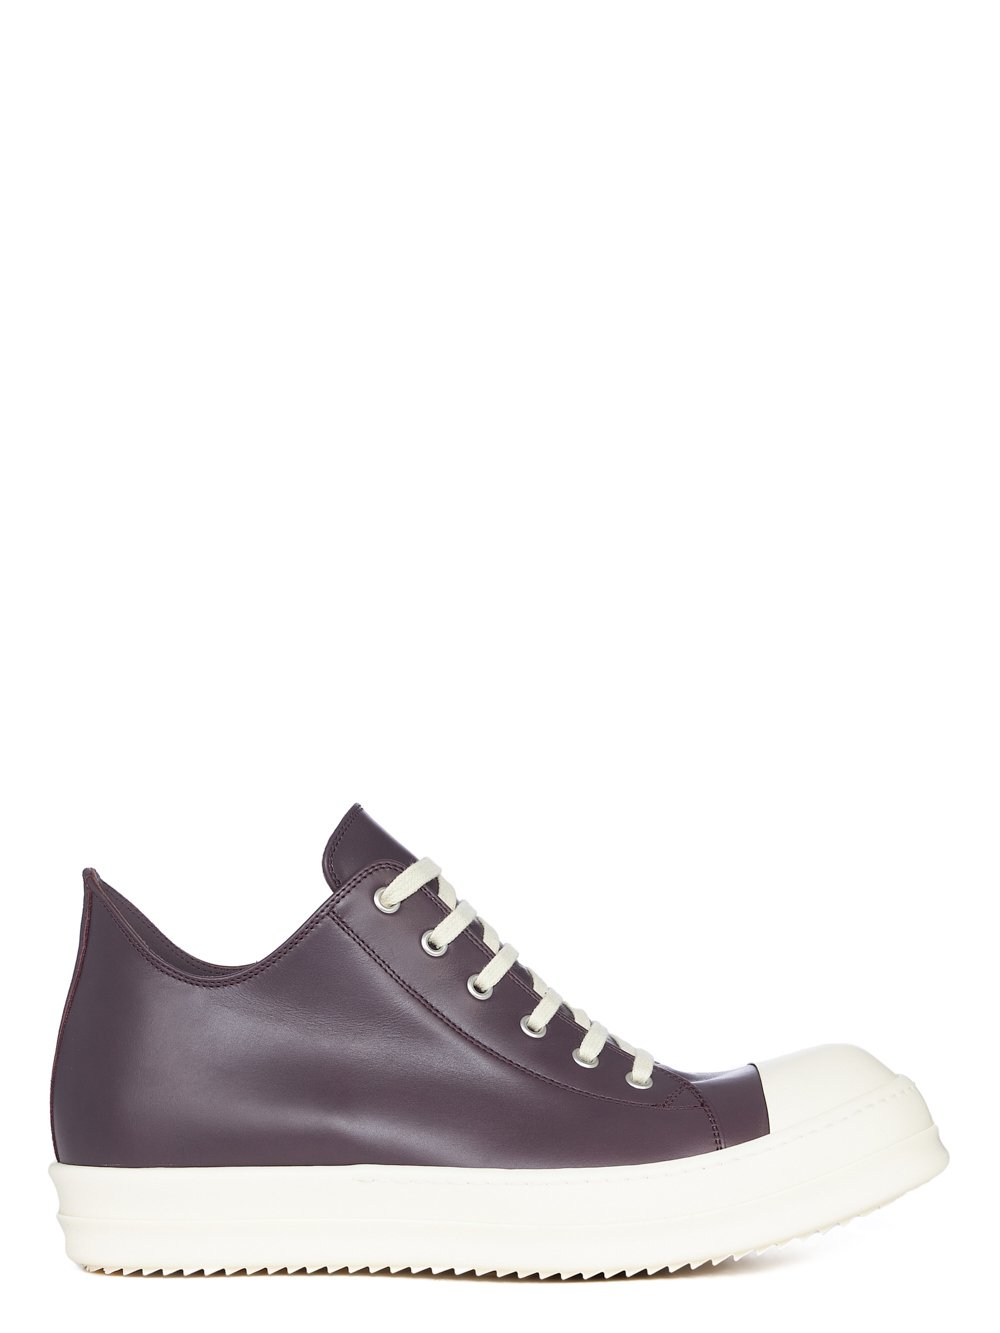 RICK OWENS FW23 LUXOR LOW SNEAKS IN AMETHYST AND MILK CORTINA GREASE CALF LEATHER